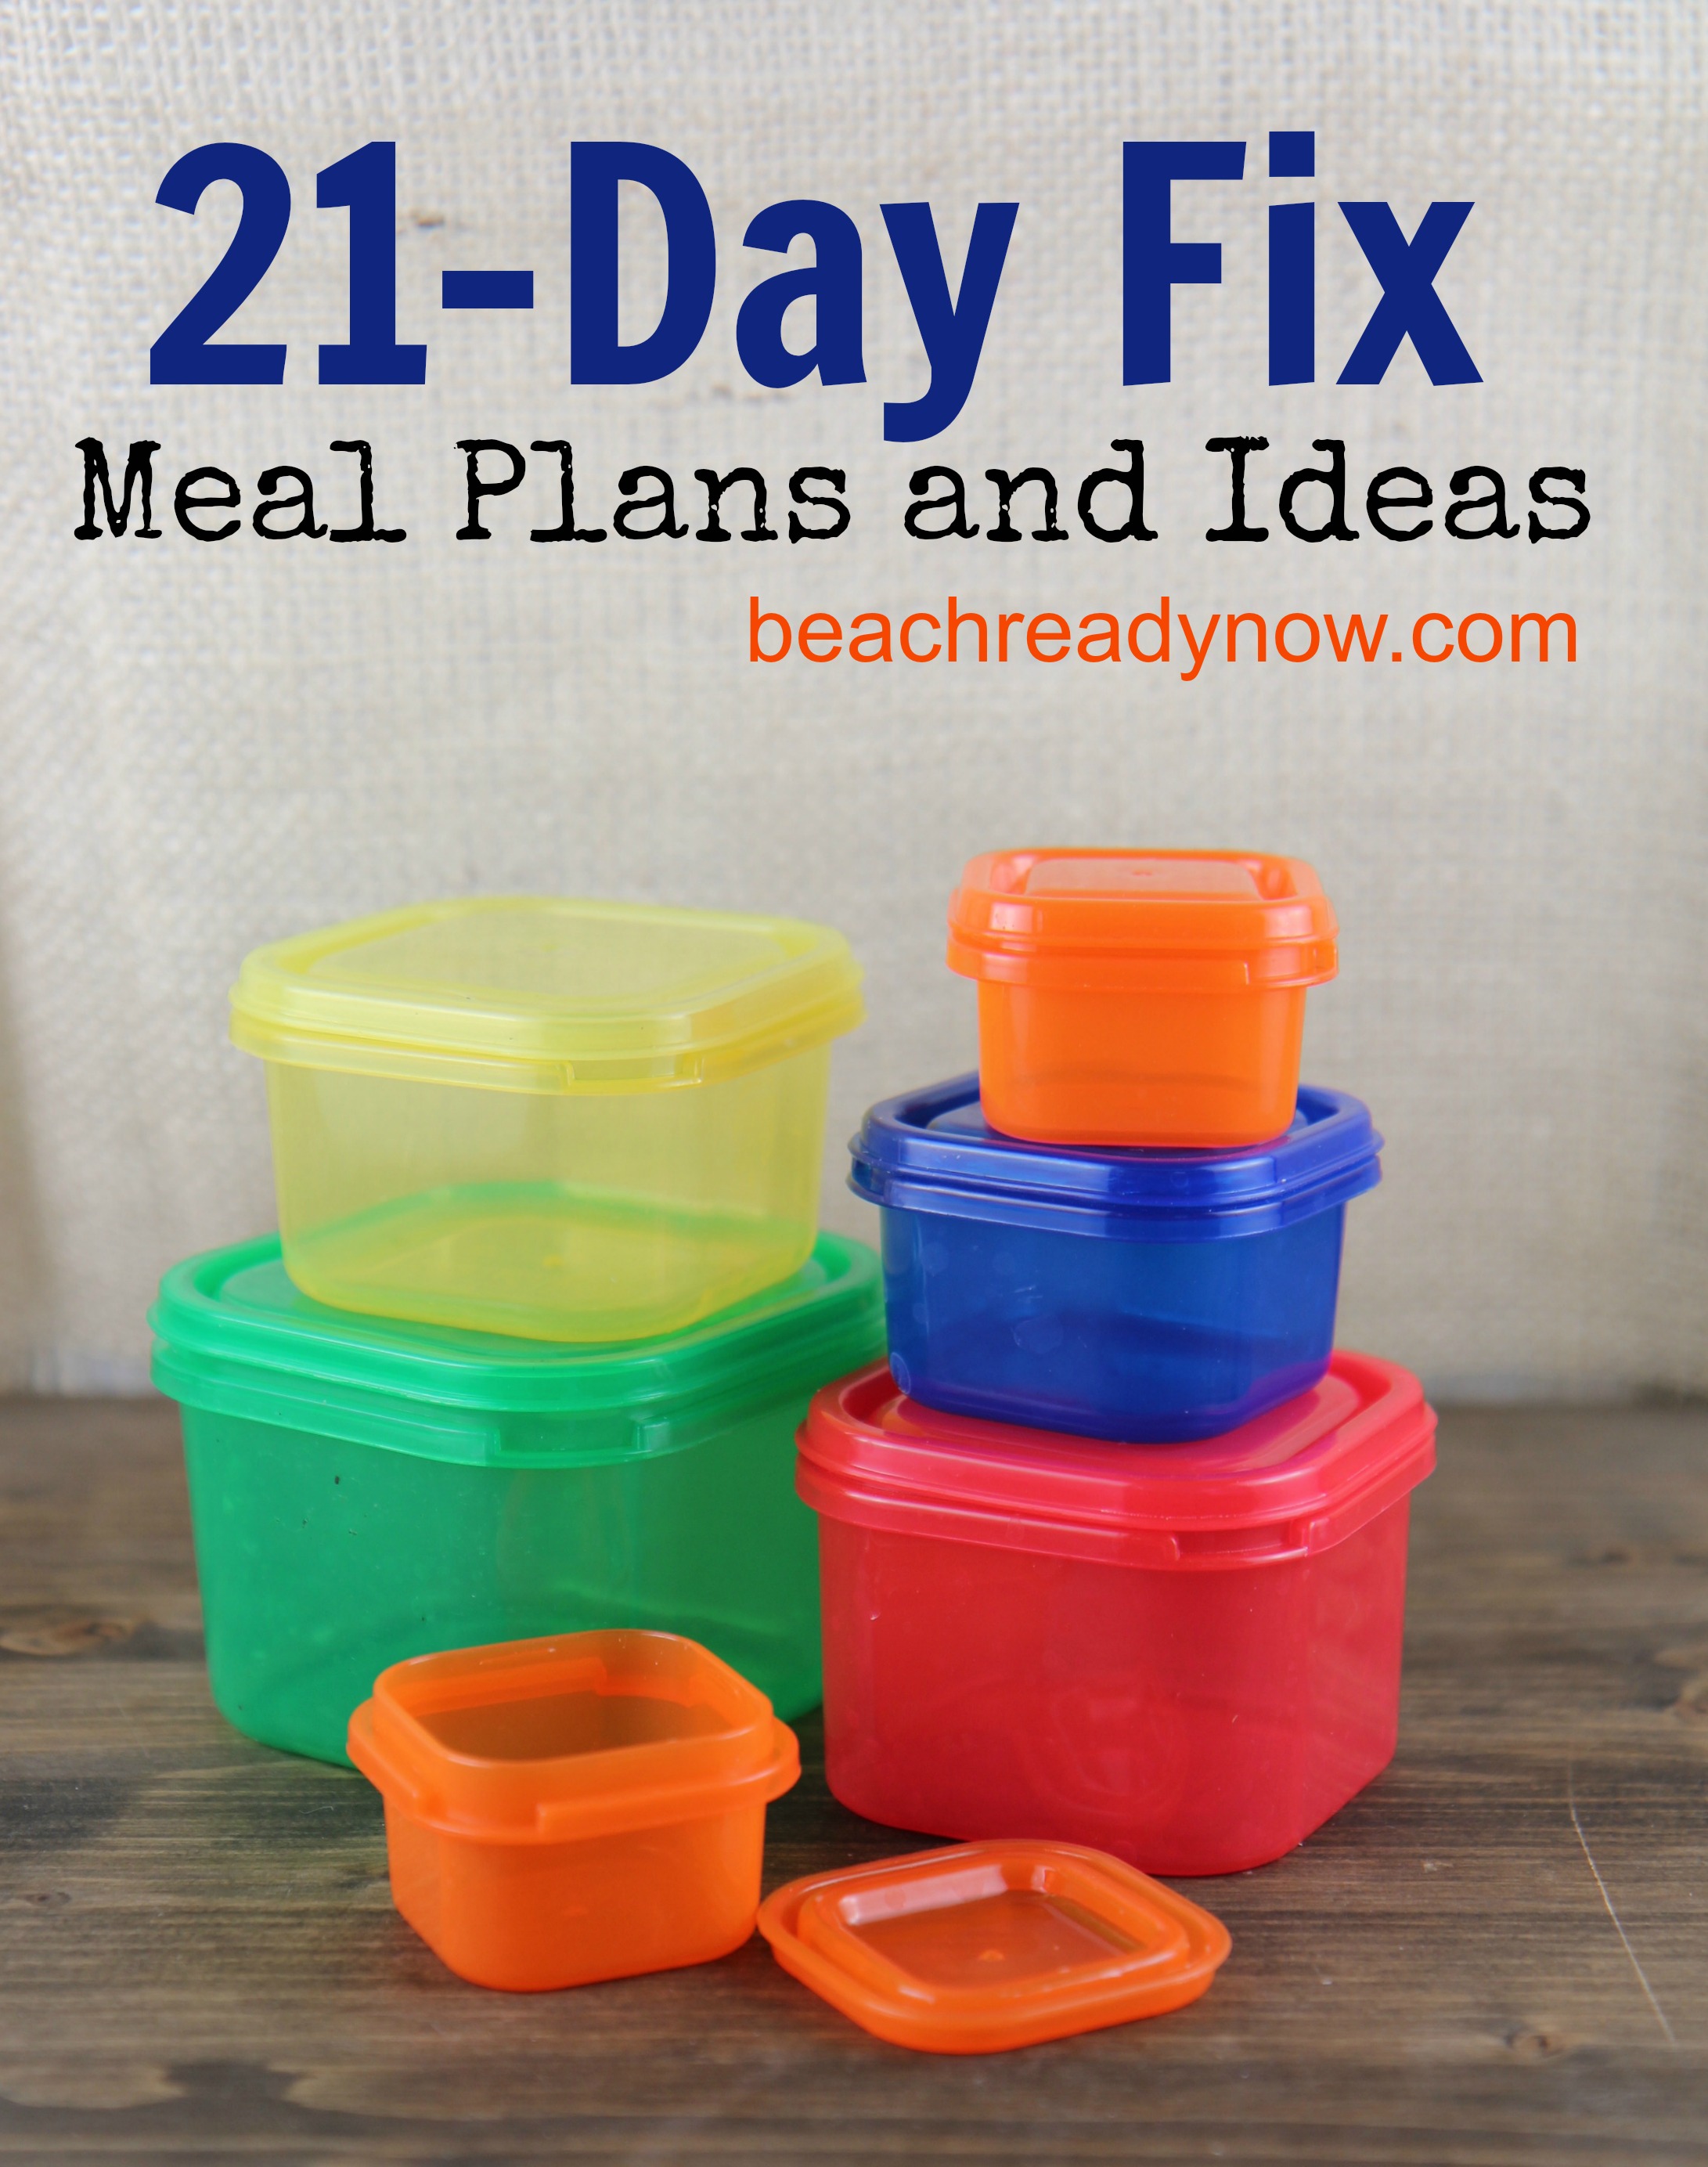 21Day Fix Meal Plans and Ideas  Beach Ready Now